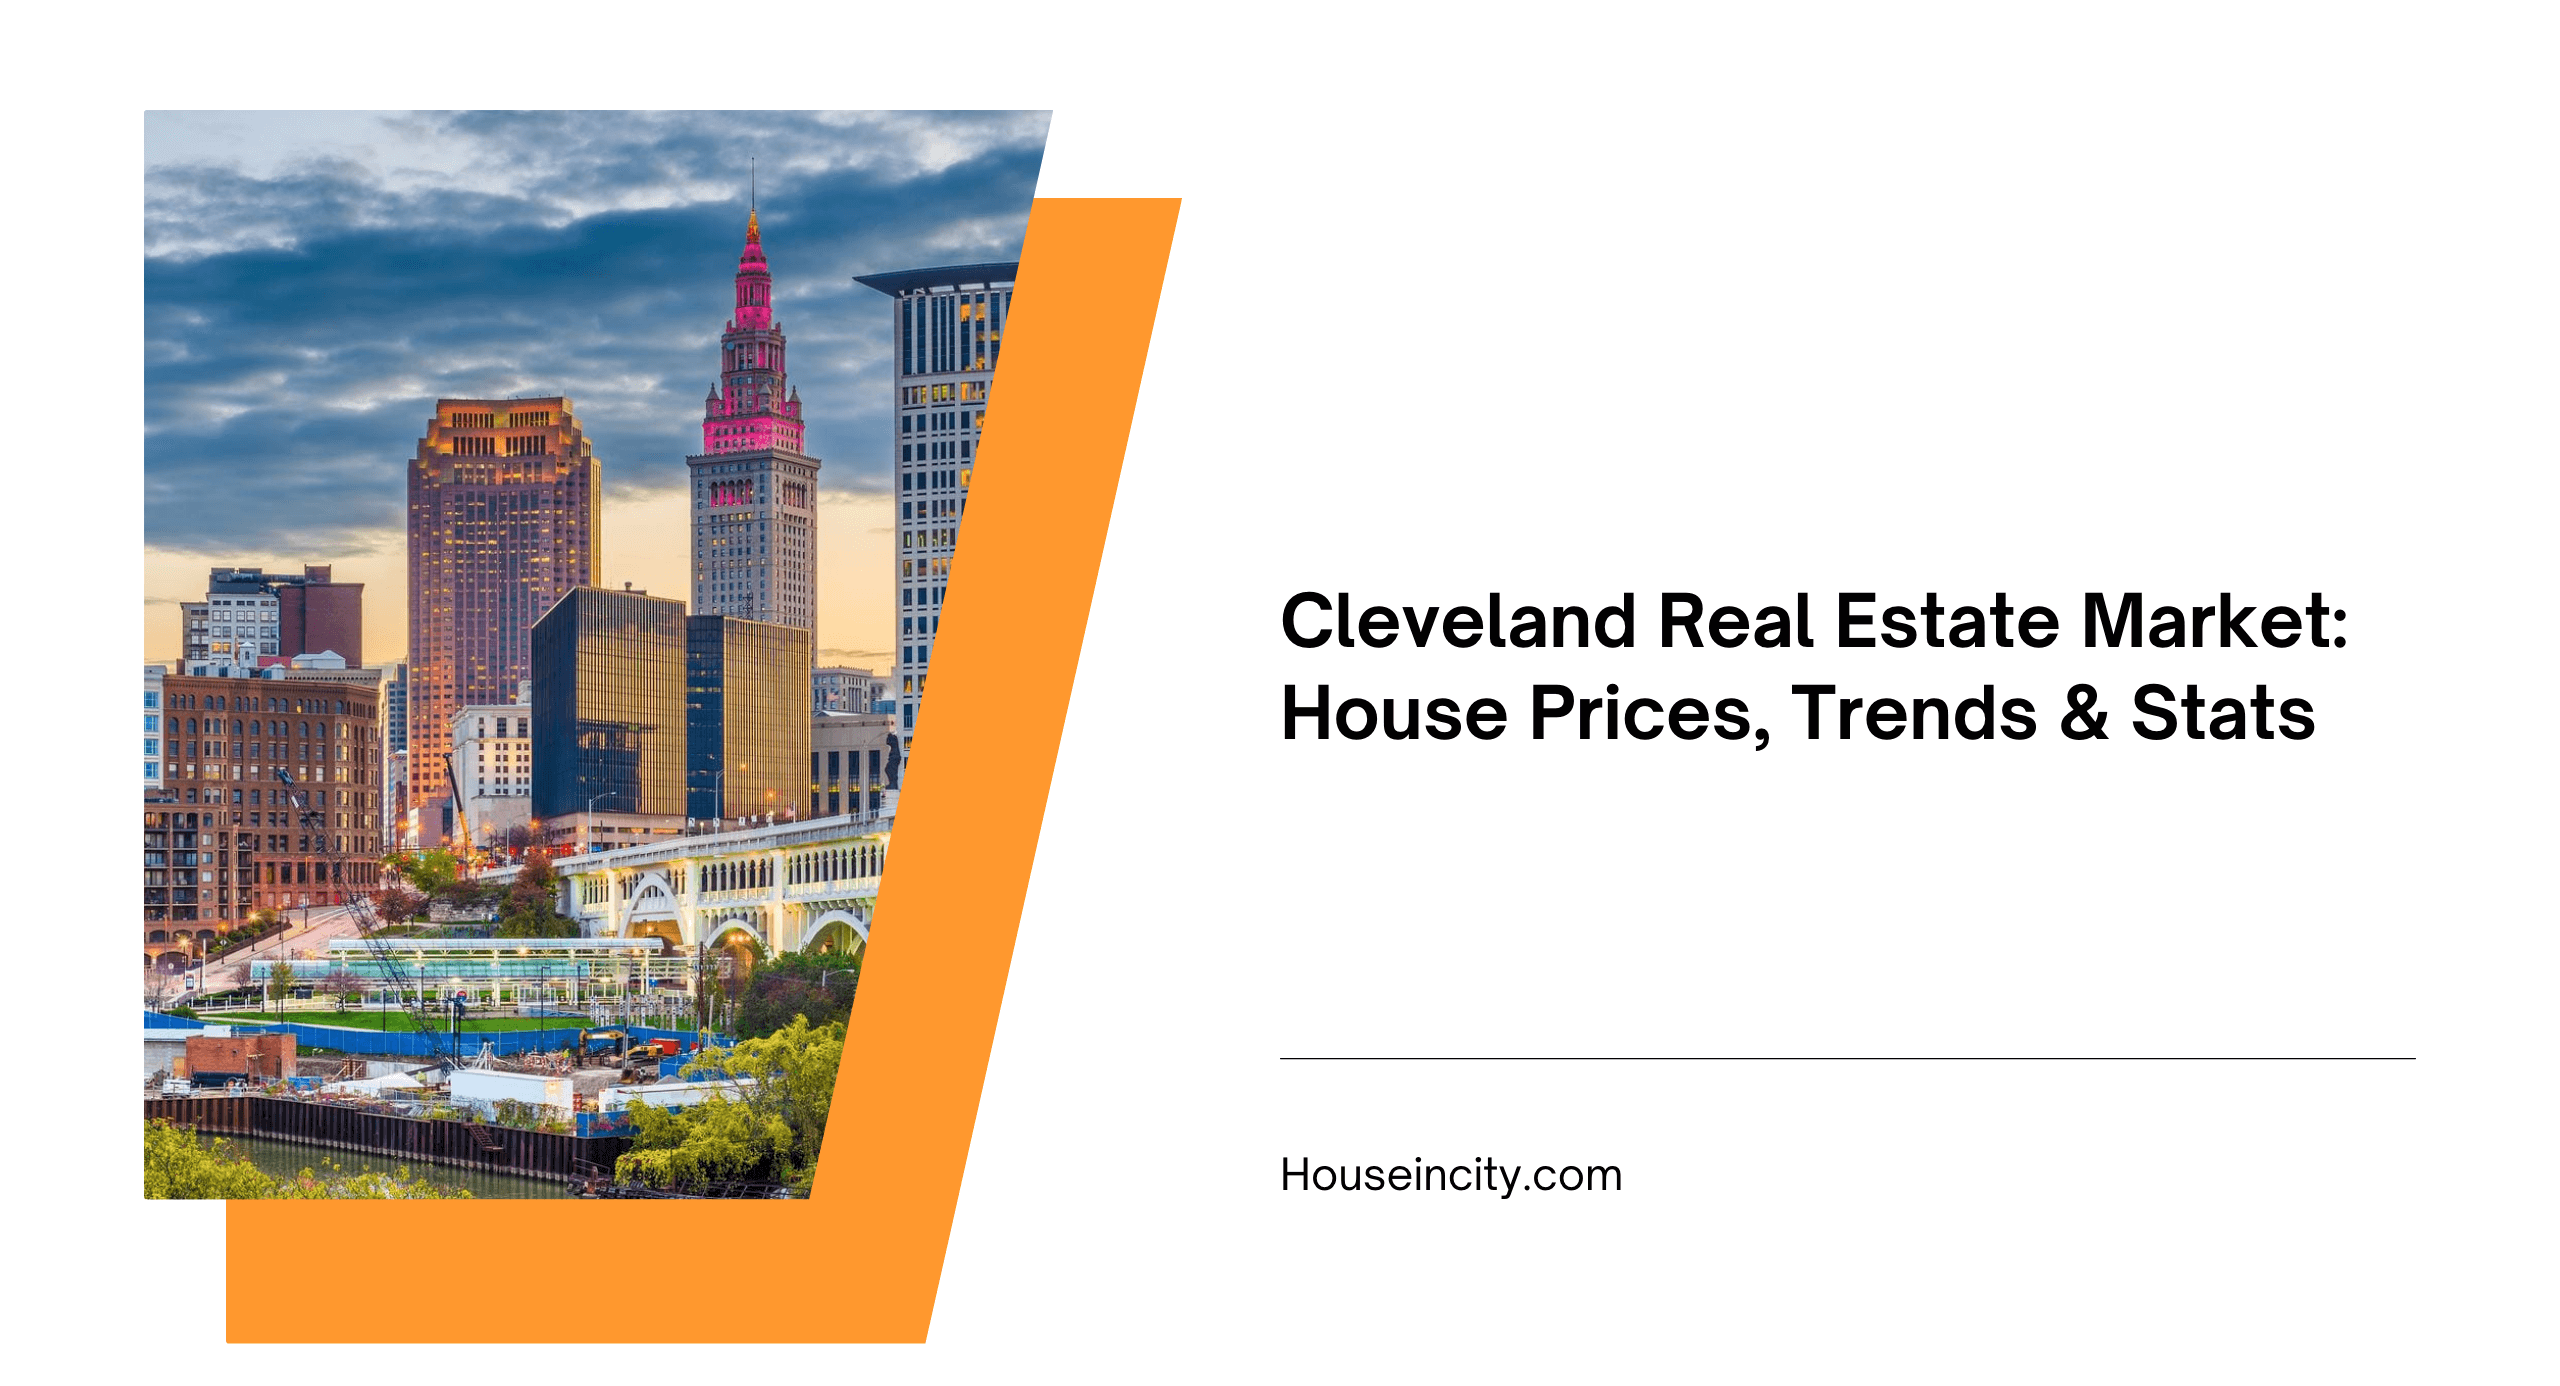 Cleveland Real Estate Market: House Prices, Trends & Stats